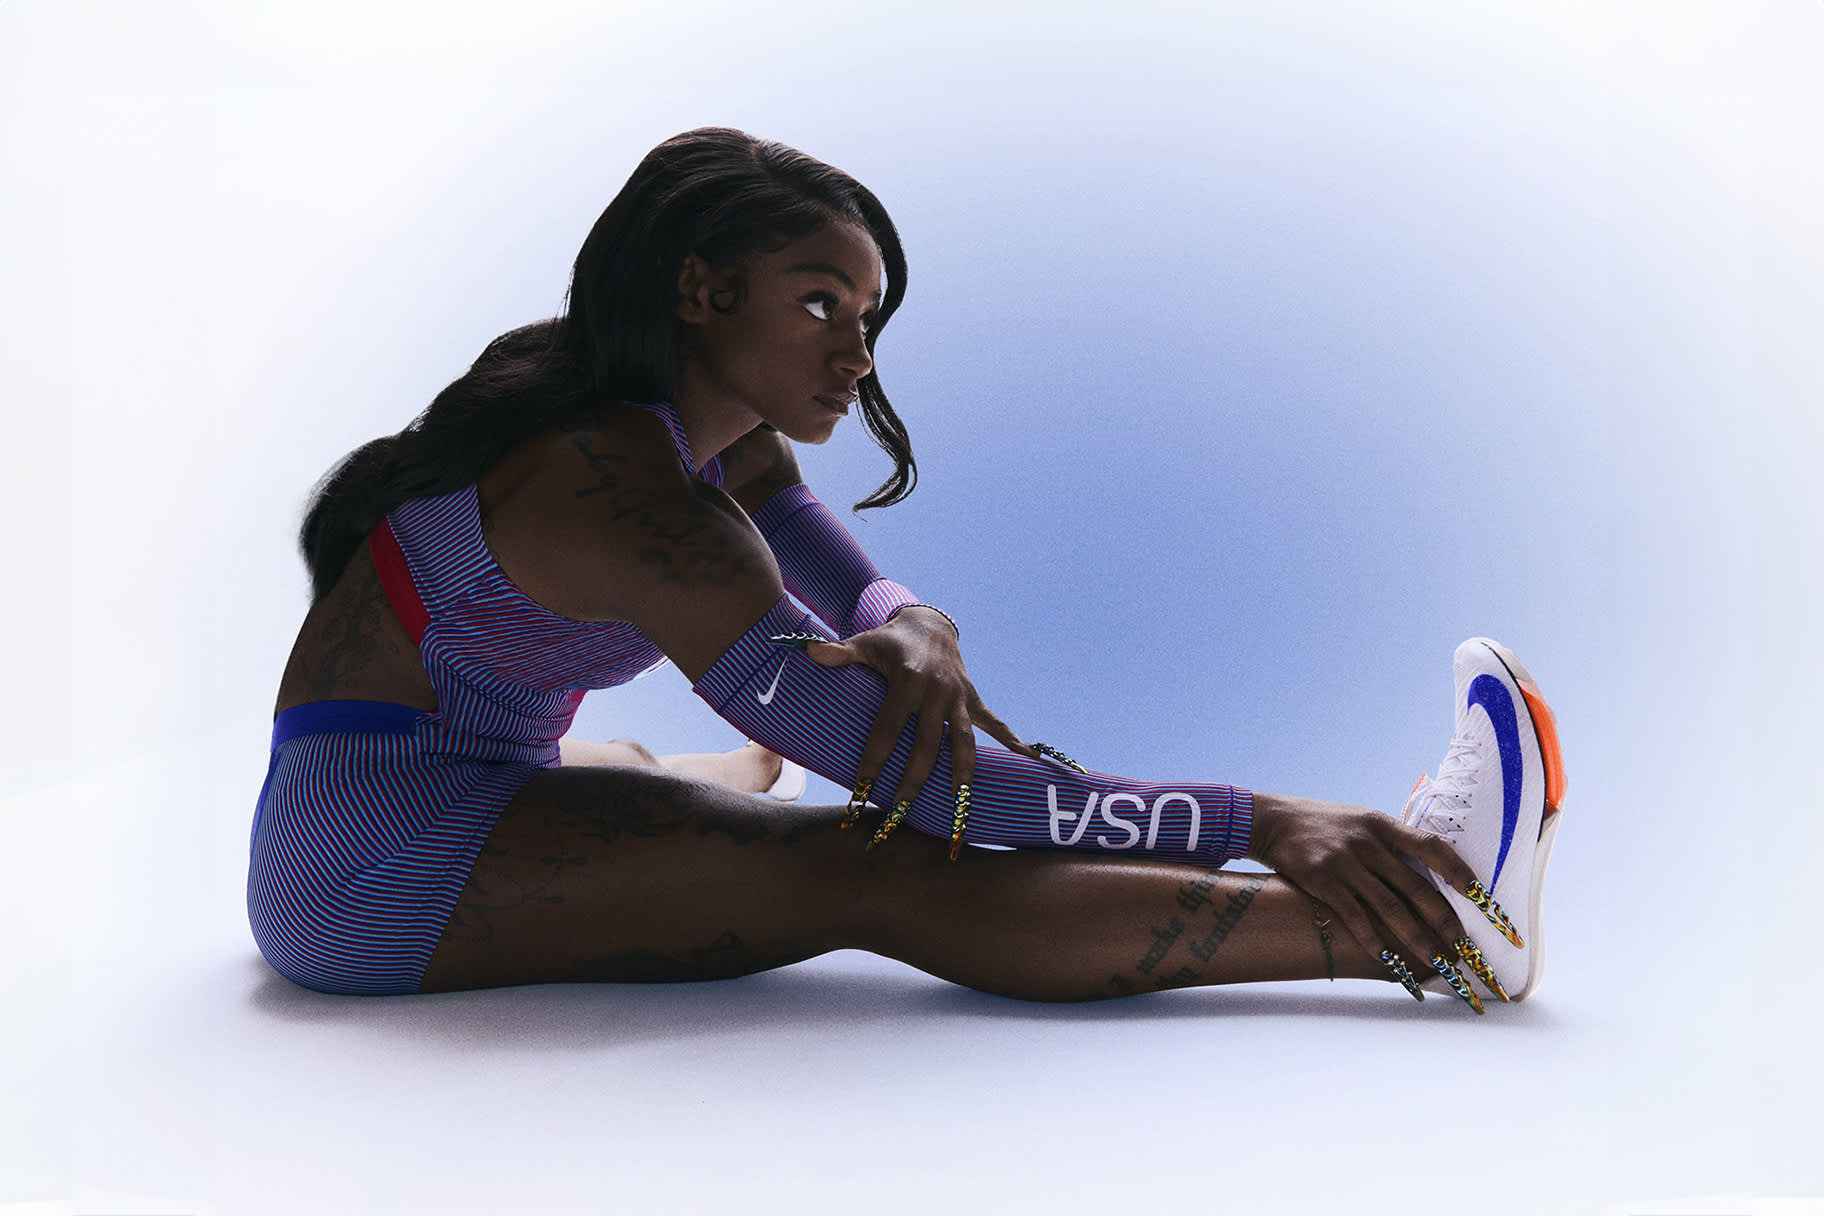 Behind the scenes: the creation of Nike Women's elite athletics kits 